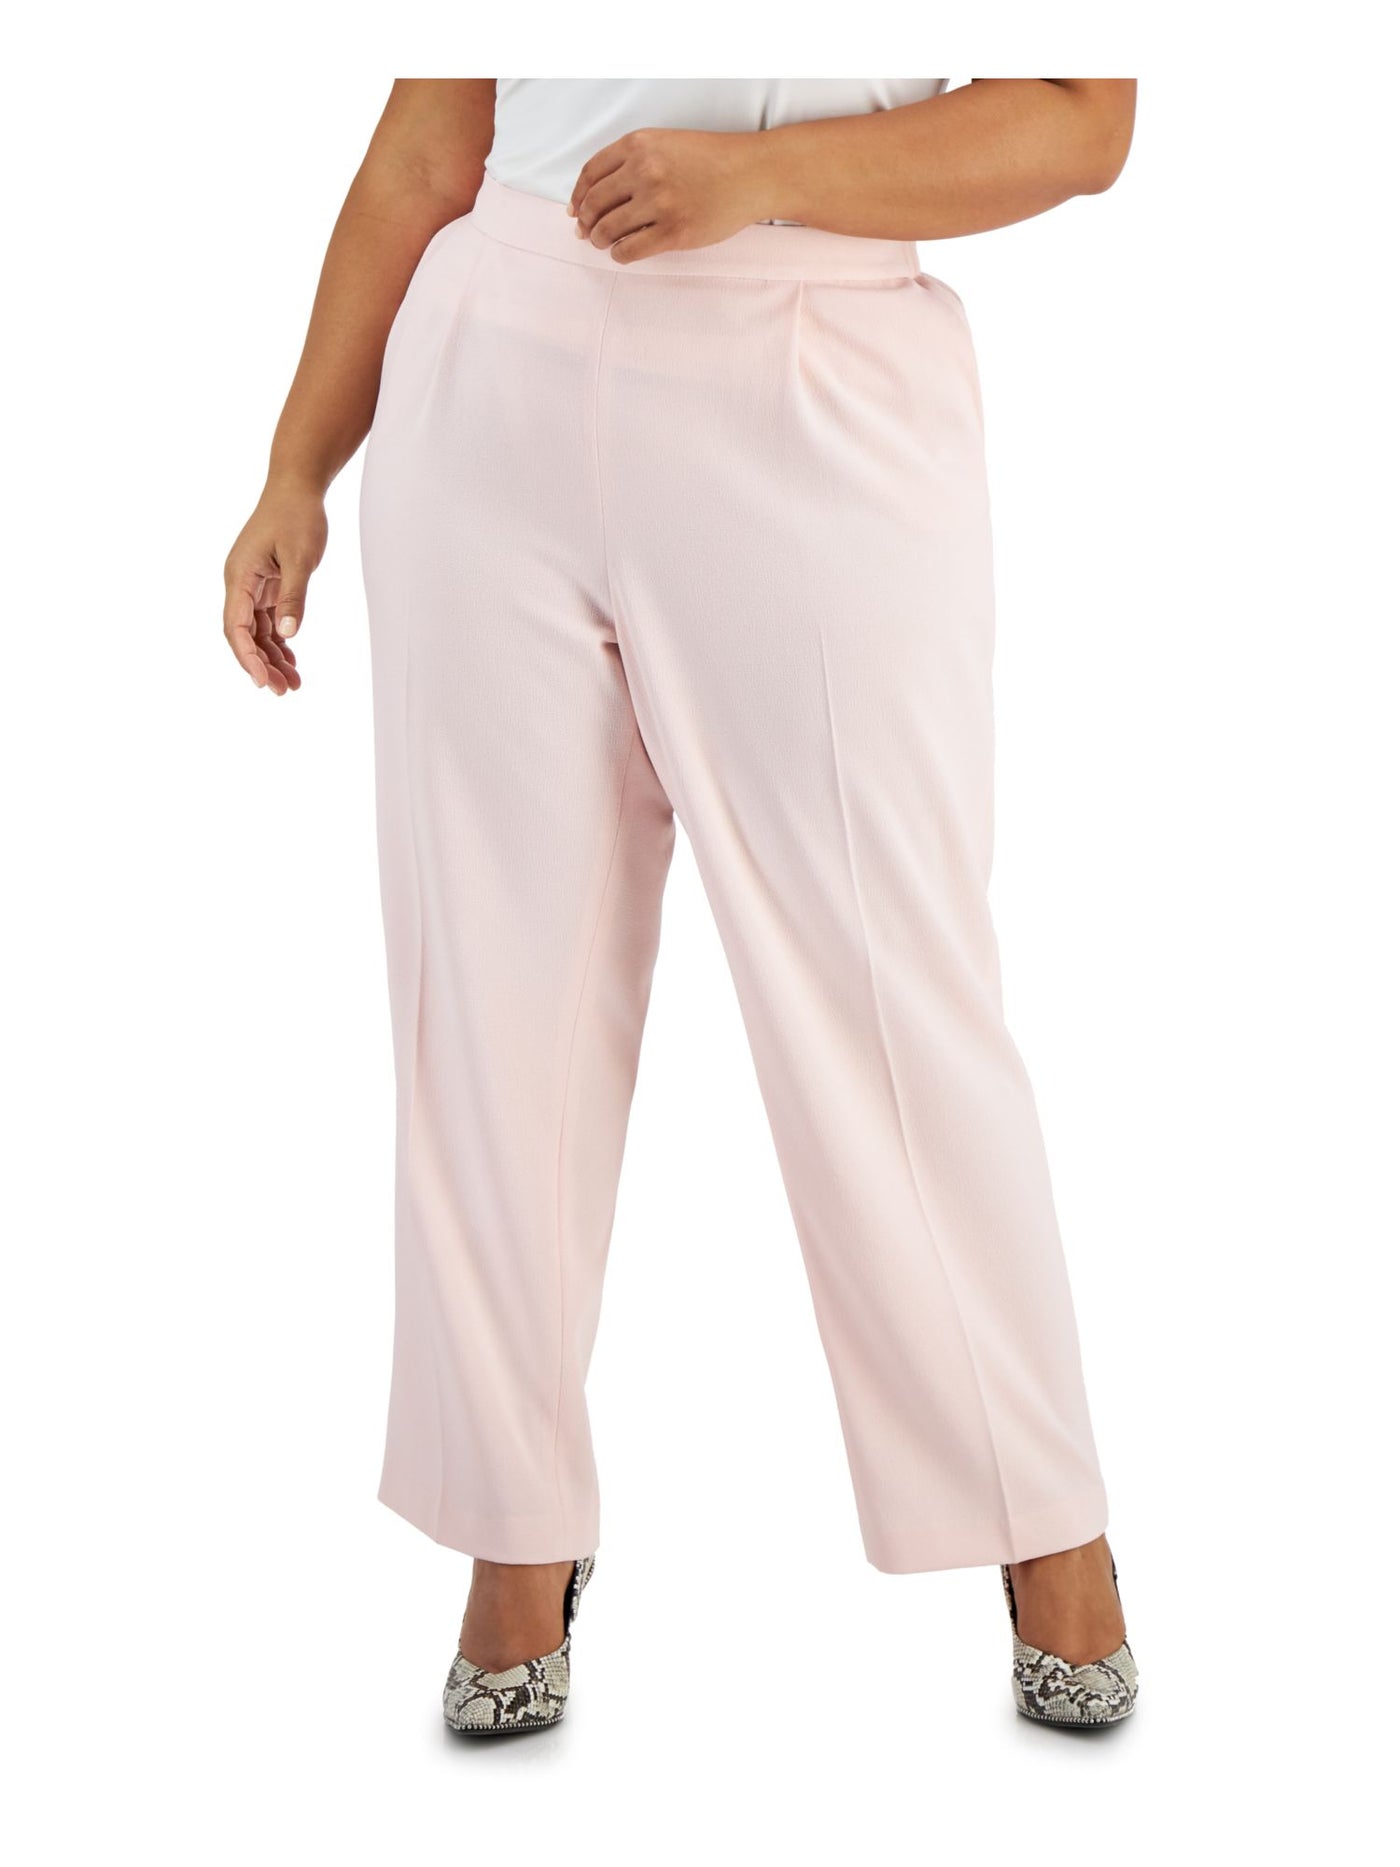 BAR III Womens Pink Textured Pocketed Elastic Waist Pull On Highrise Wear To Work Straight leg Pants Plus 2X